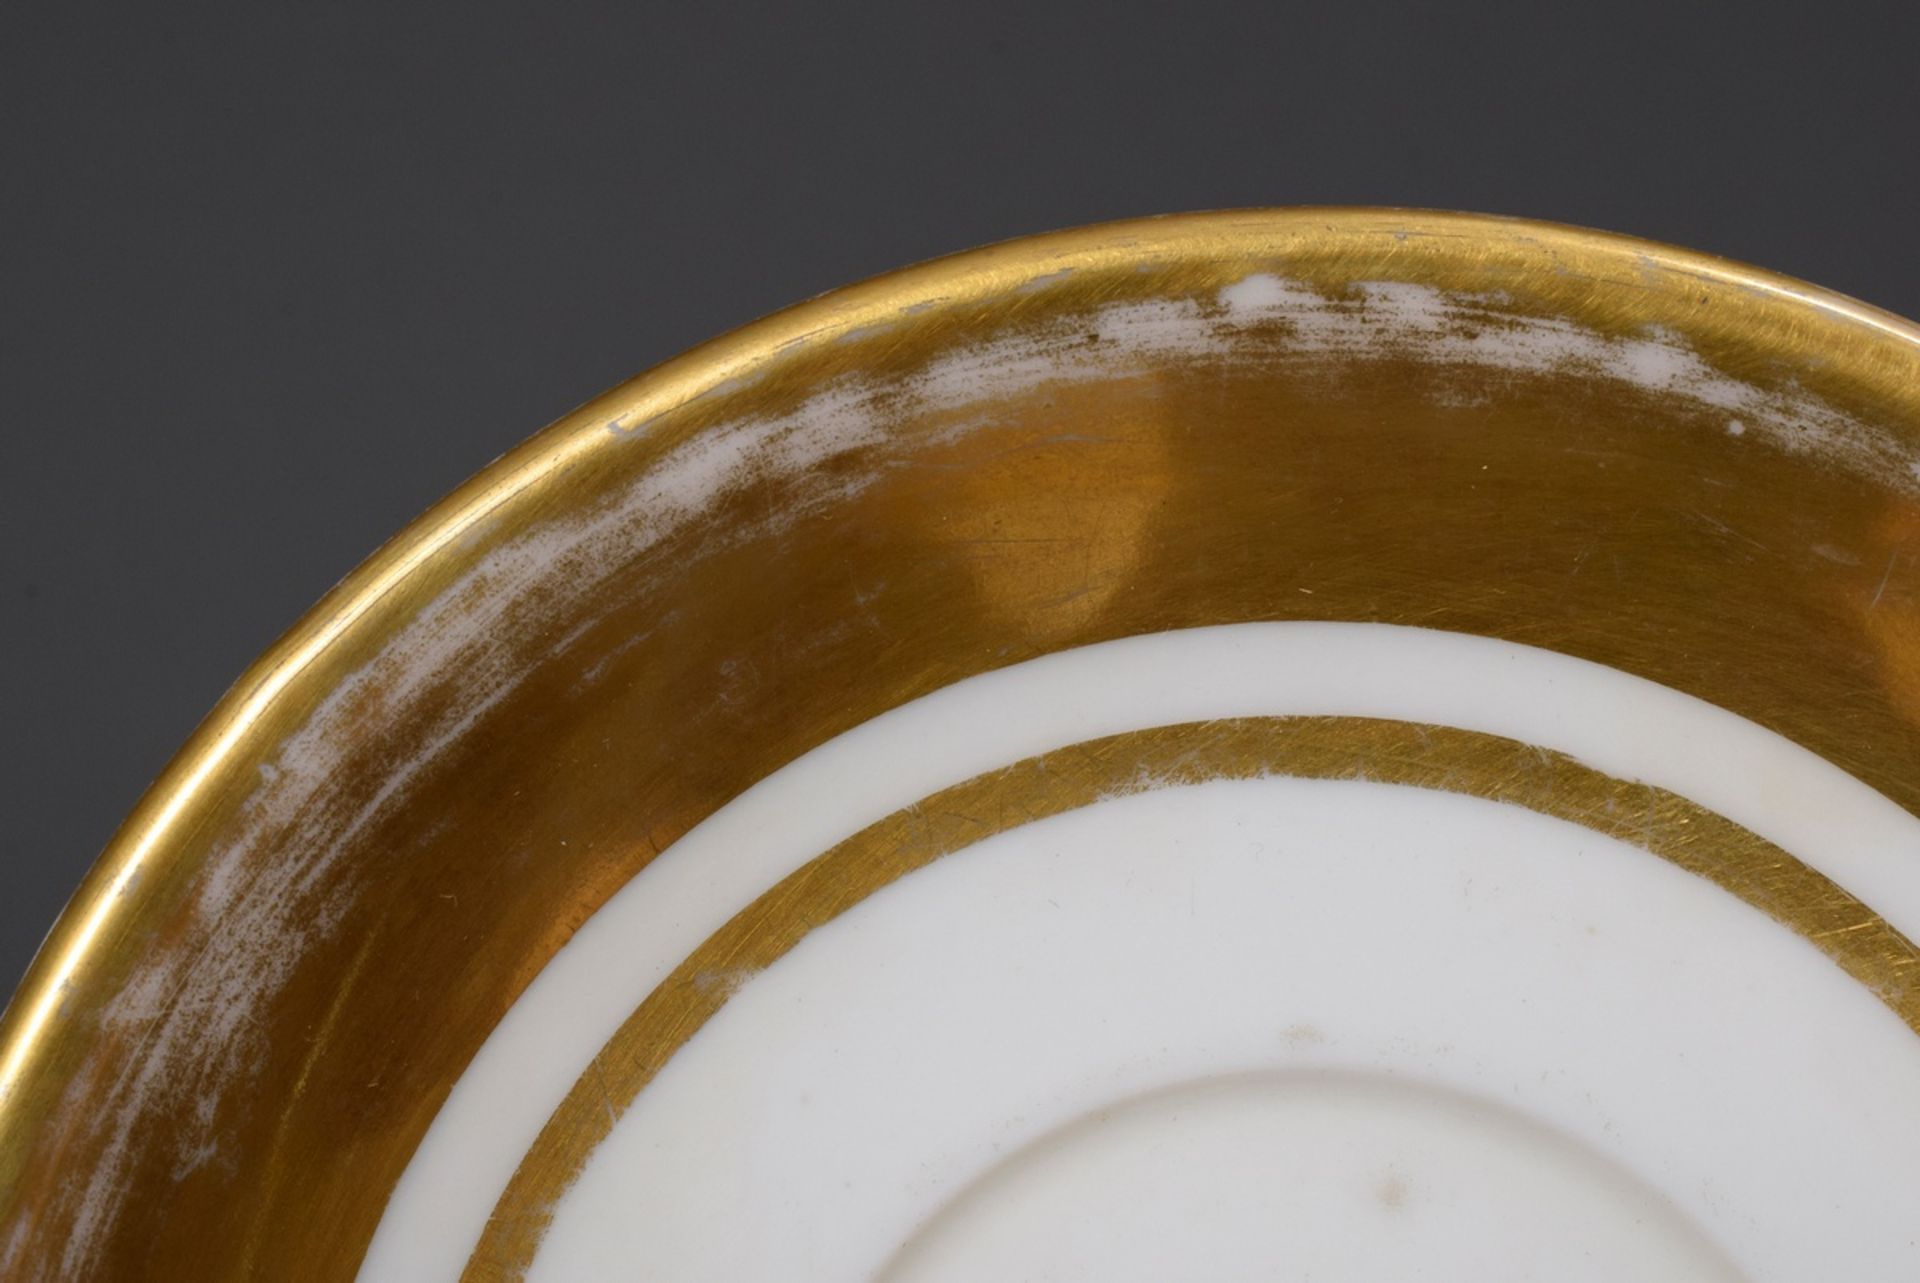 Wallendorf view cup with fine painting "Johannesberg near Fulda" on gold background, incised mark o - Image 8 of 9